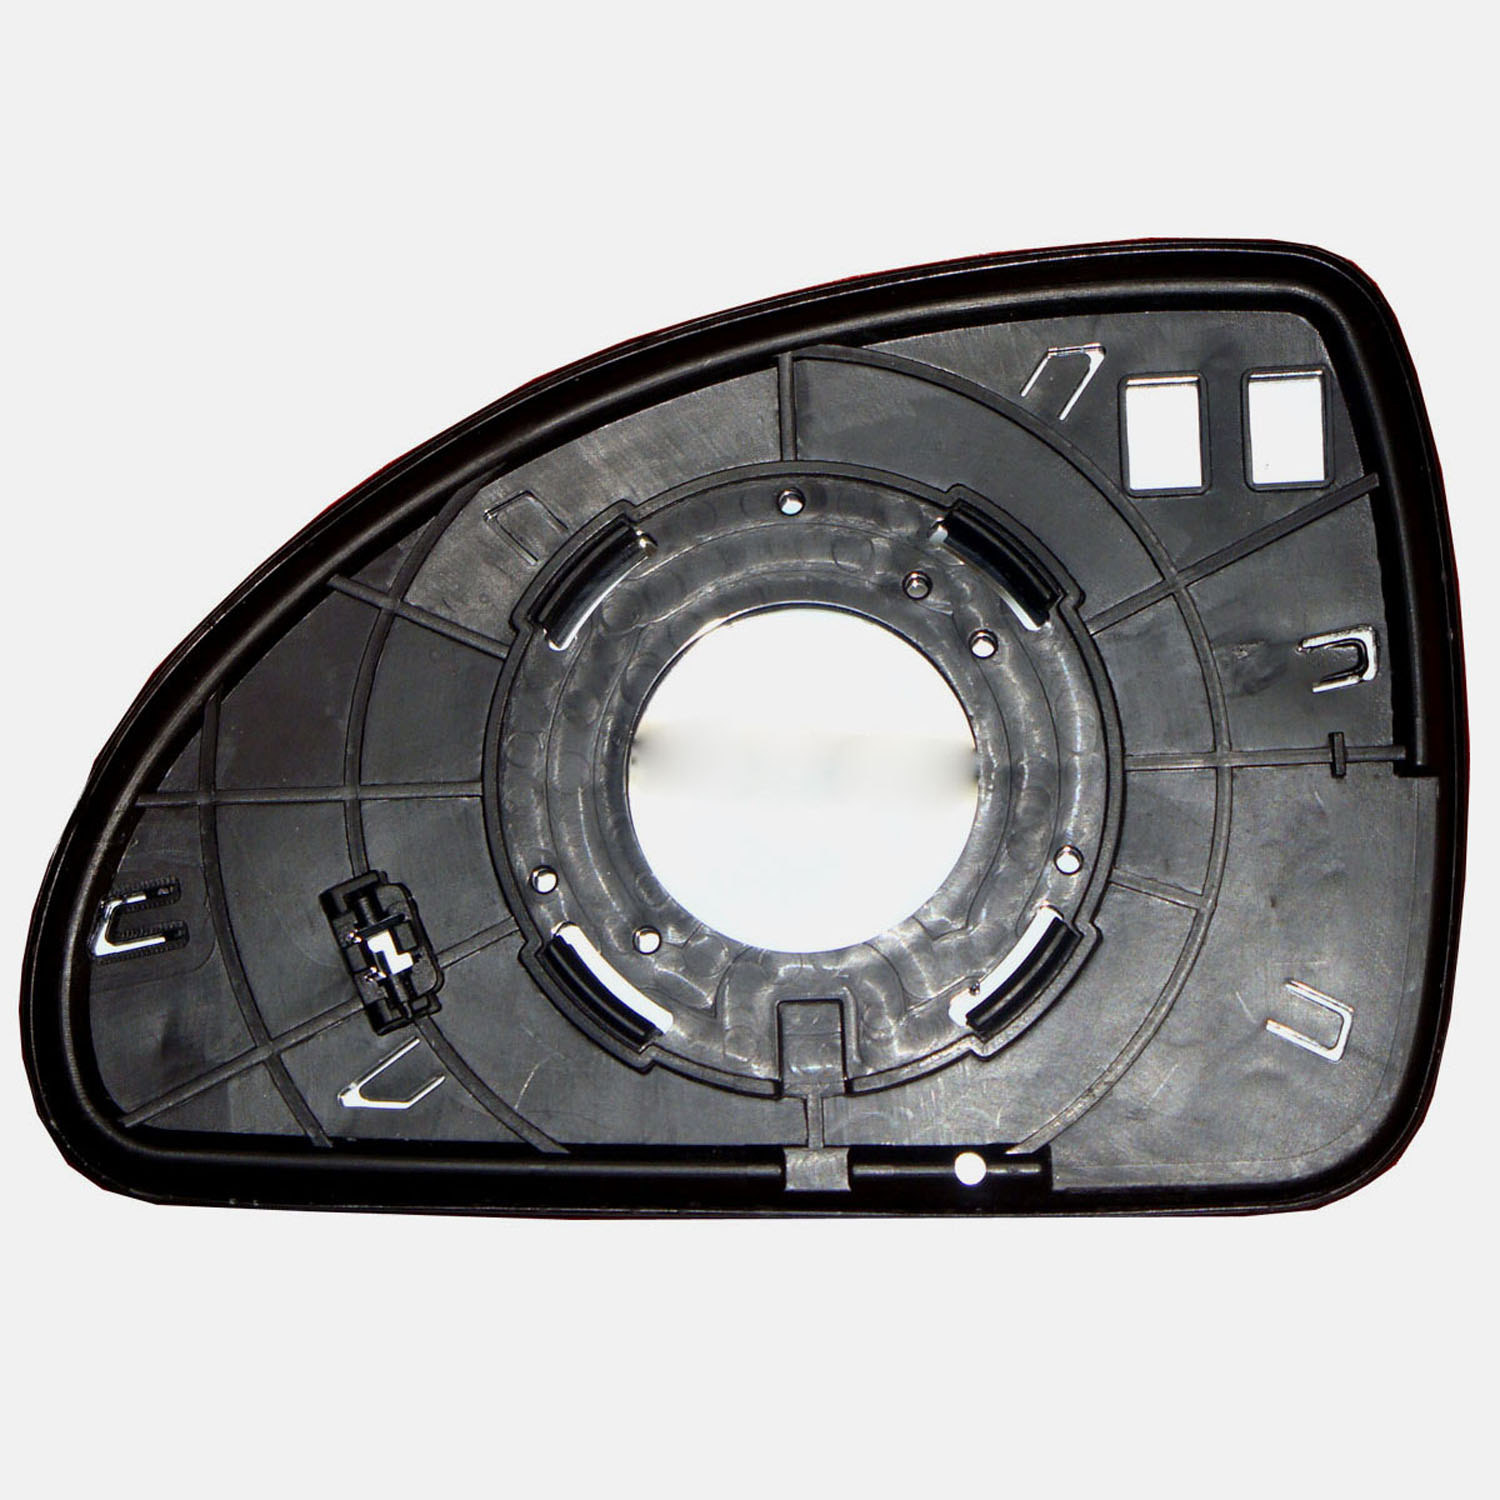 KIA Ceed Wing Mirror Glass With Base RIGHT HAND ( UK Driver Side ) 2006 to 2009 – Non-Heated Base Wide Angle Wing Mirror